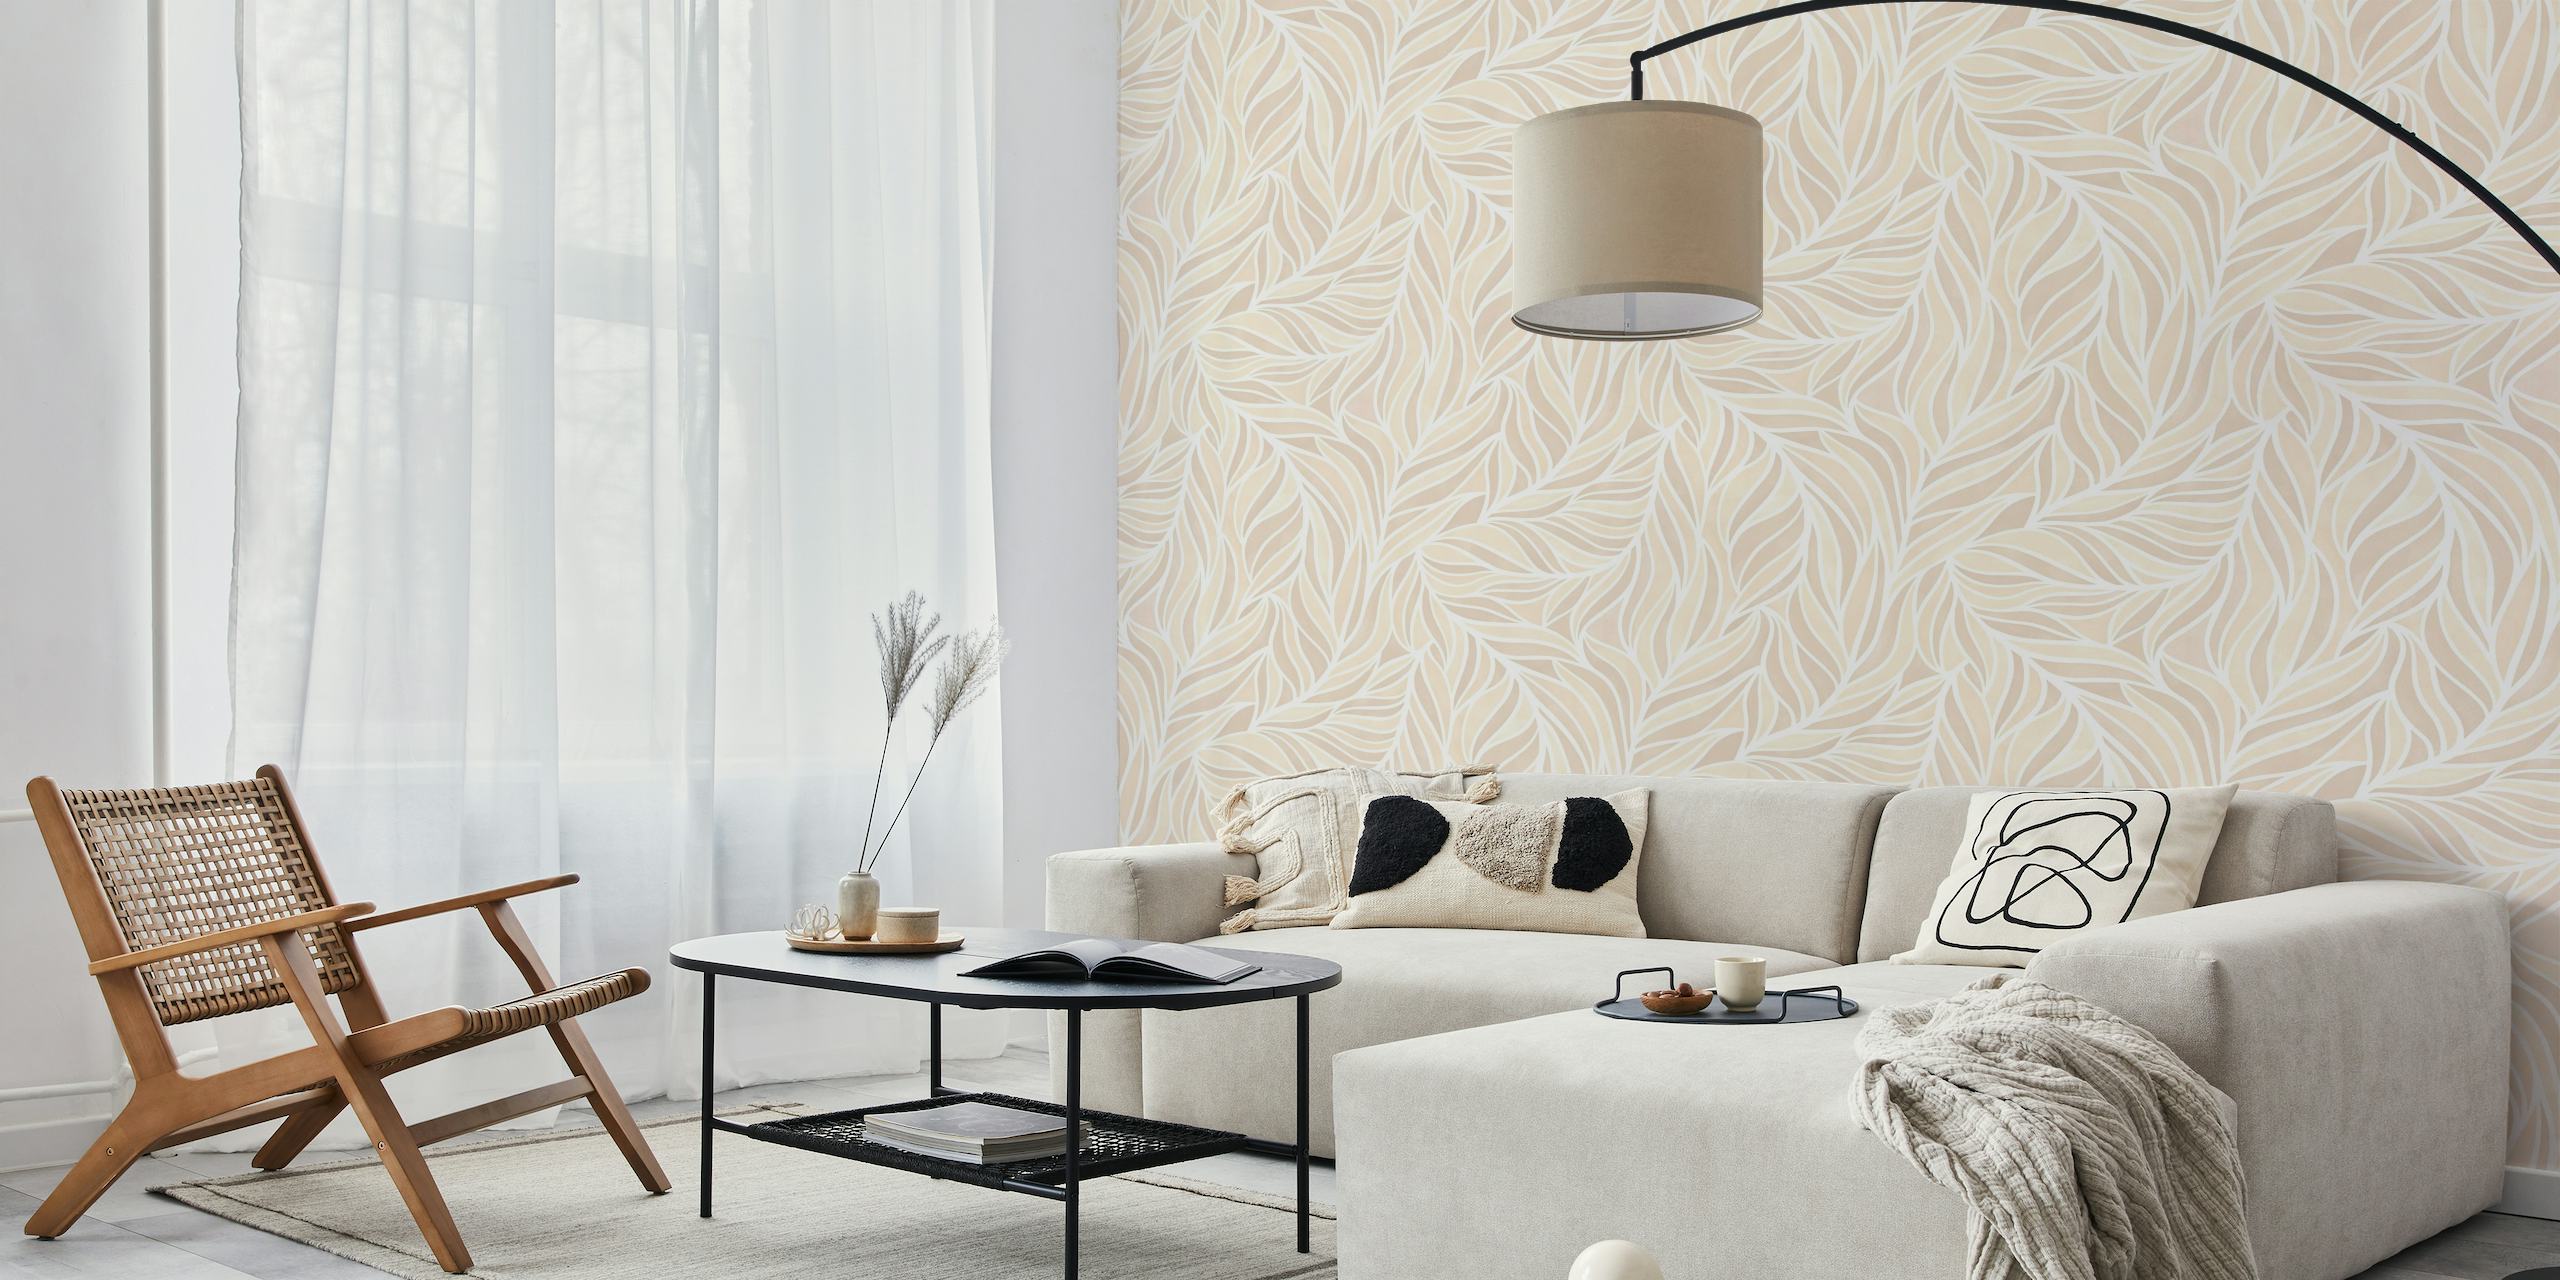 Warm minimalist abstract leaf patterns on an off-white background wall mural